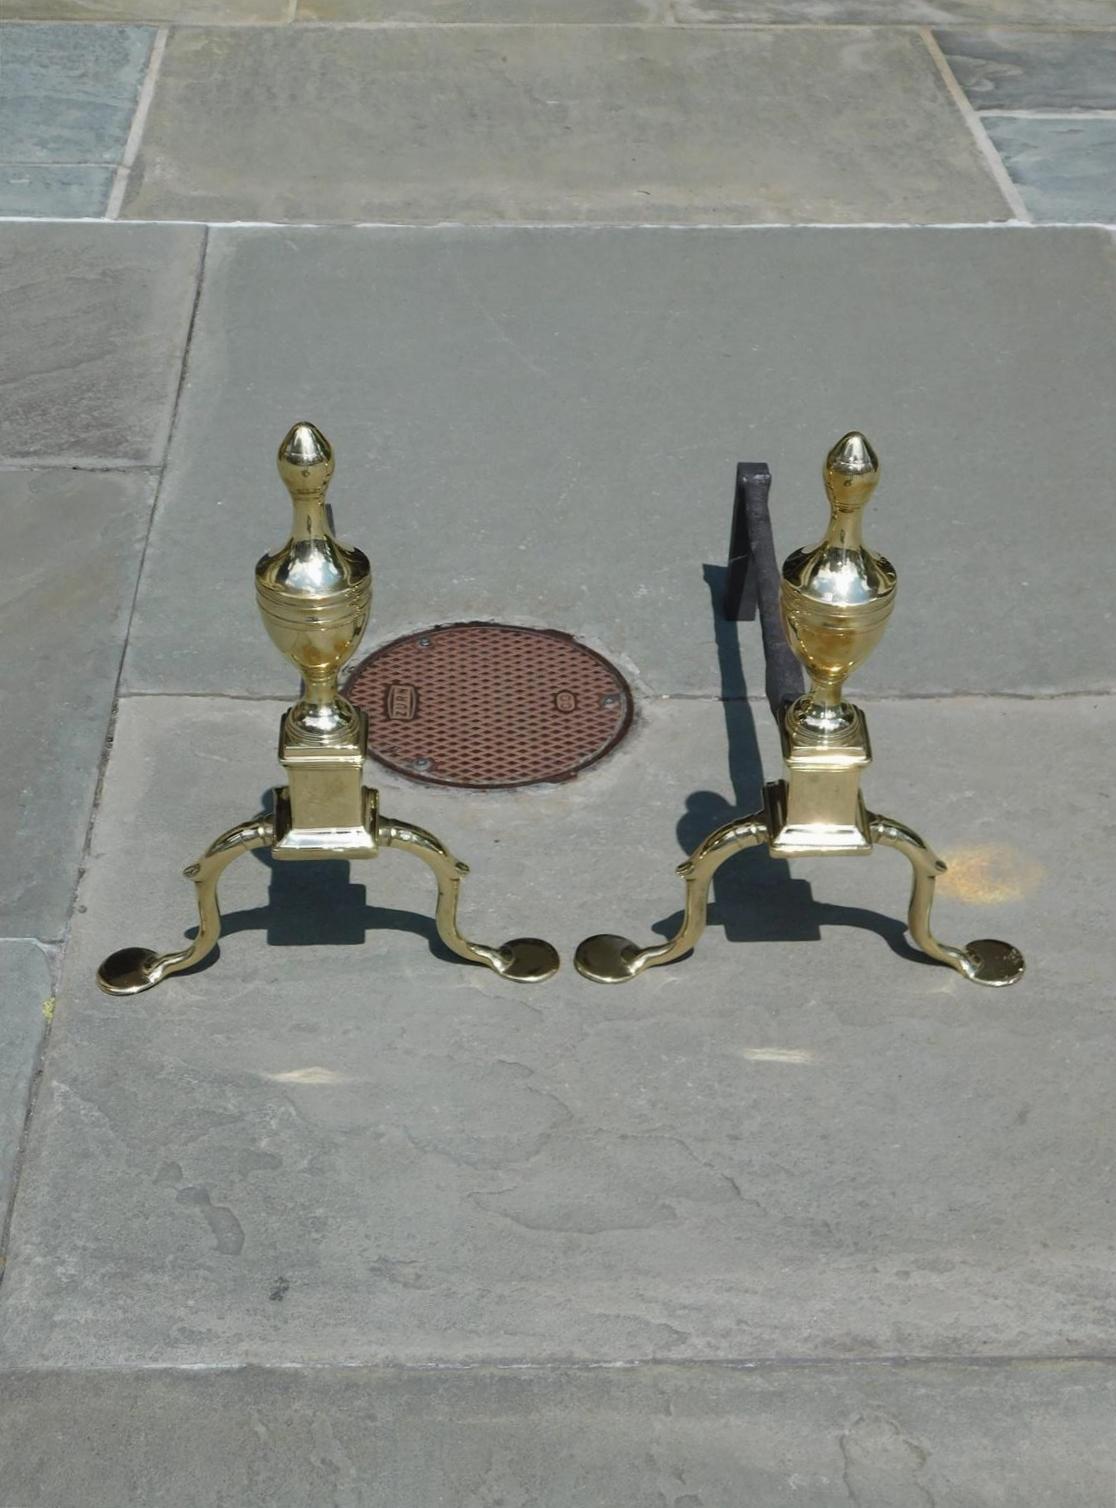 Pair of American brass flanking urn incised ringed finial andirons with squared plinths, banded spur legs and resting on the original penny feet. Late 18th Century, Philadelphia.